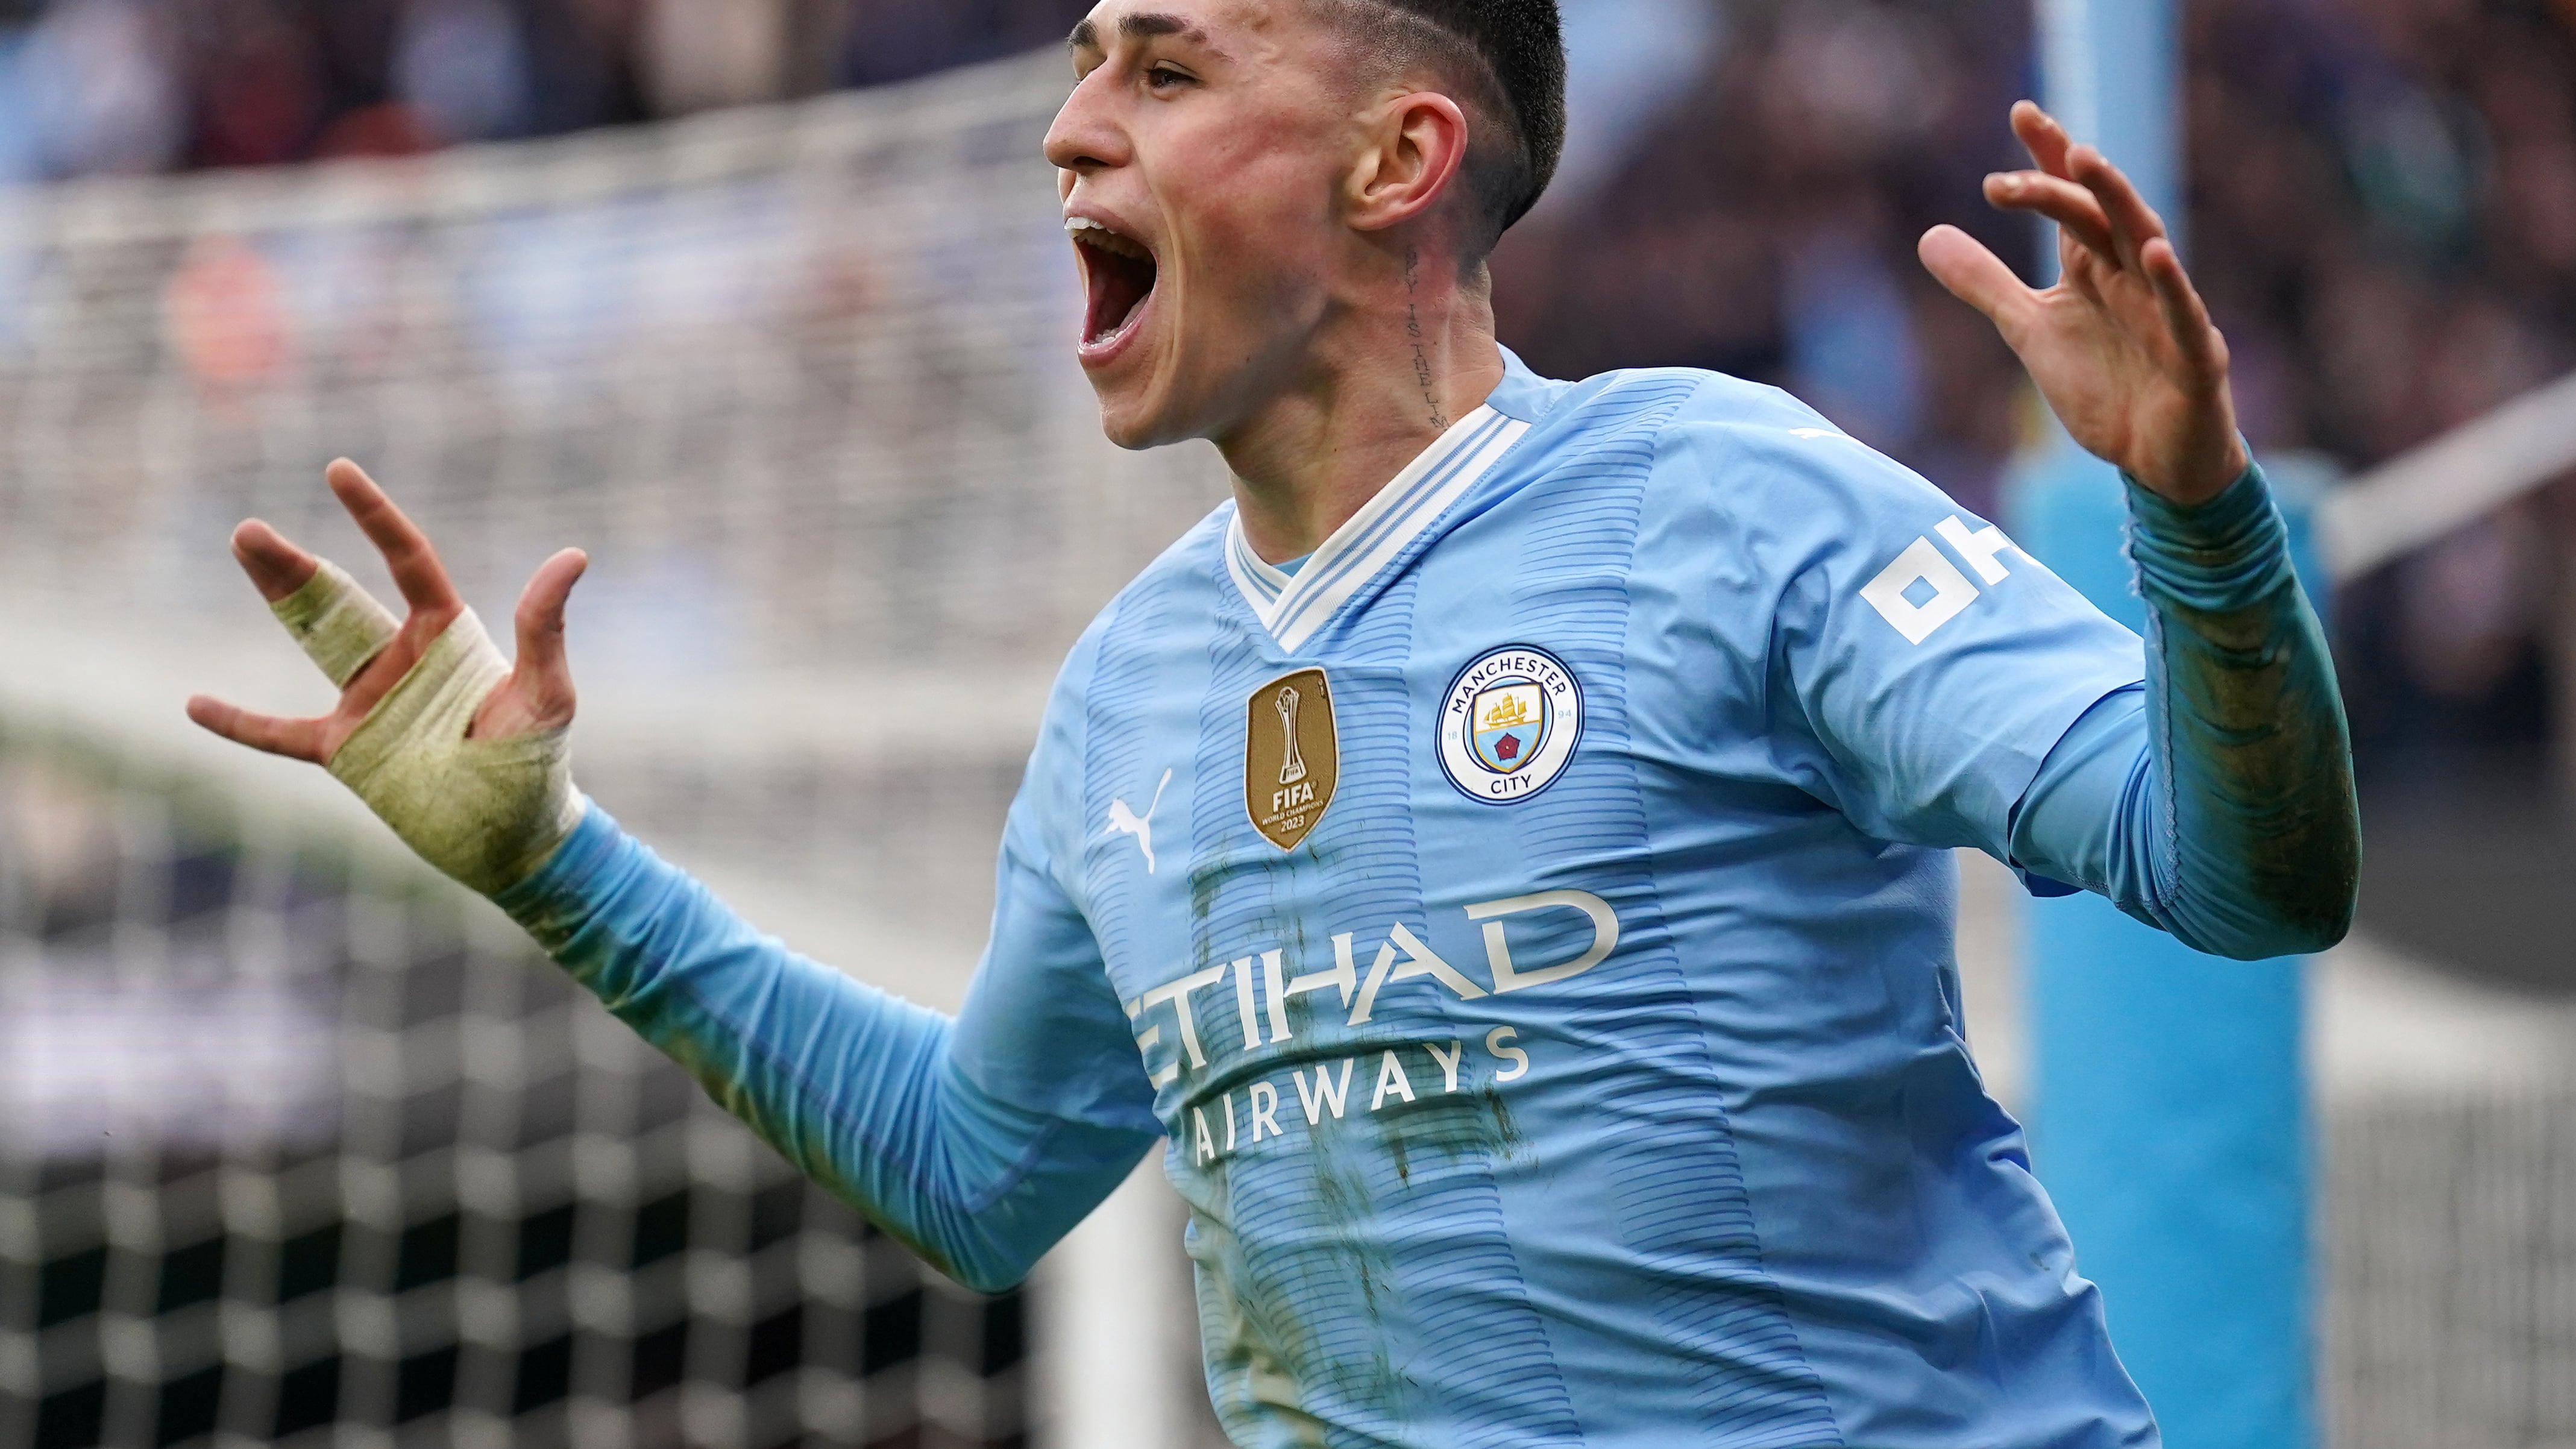 Phil Foden has played a key role in Manchester City’s latest title success